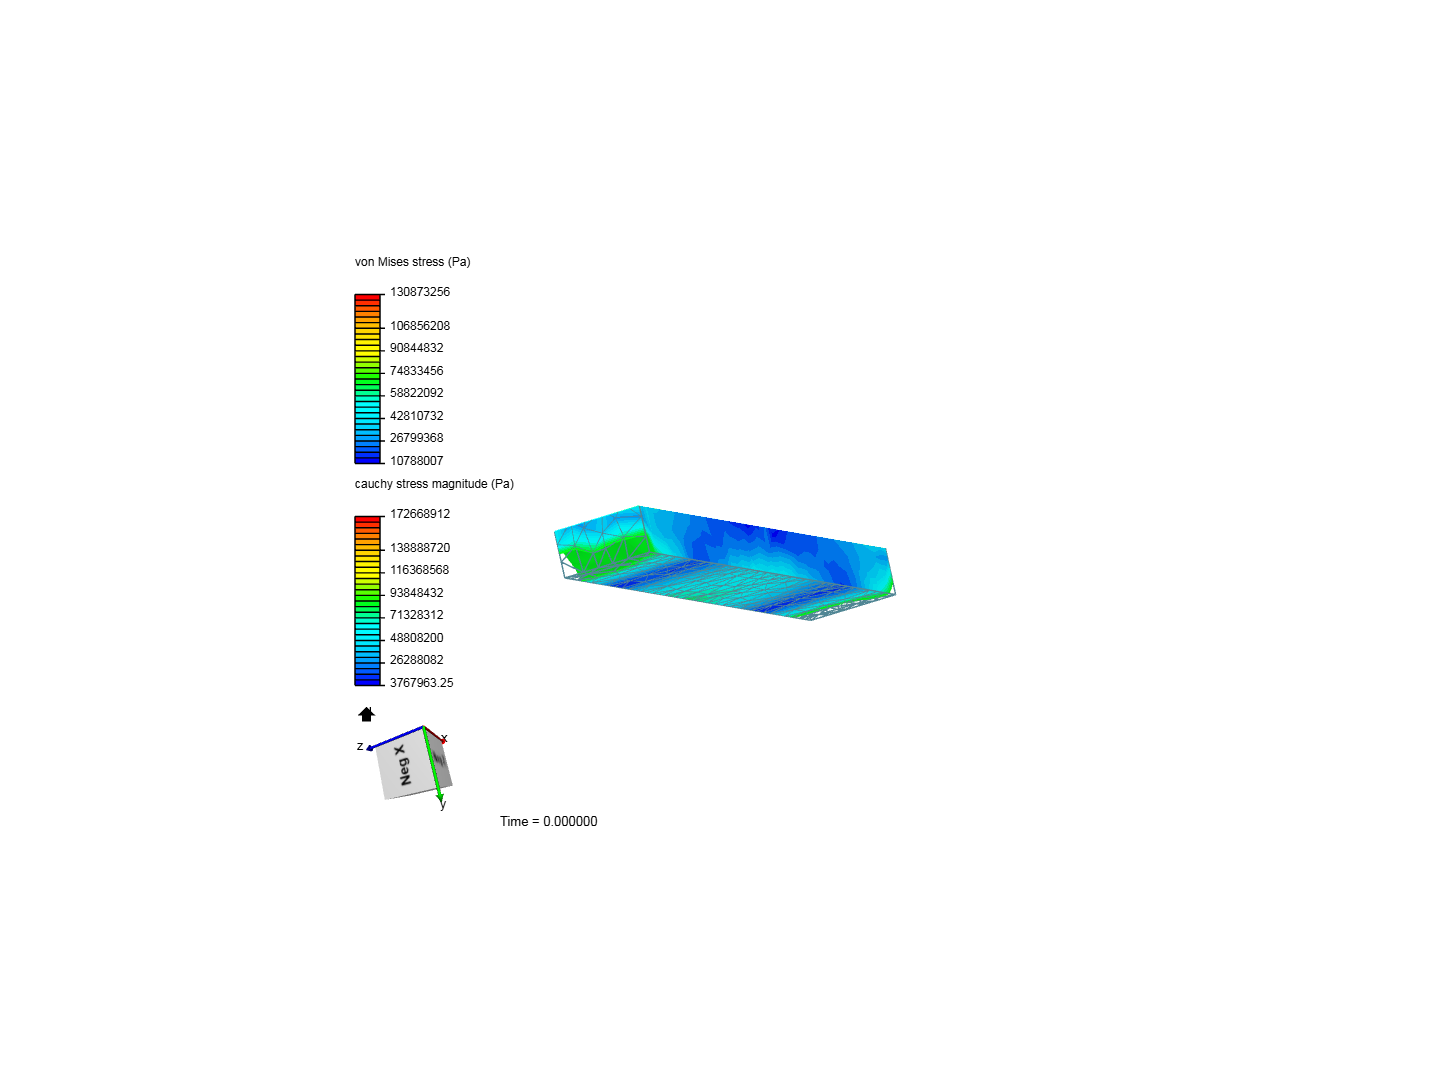 a structural ansys image